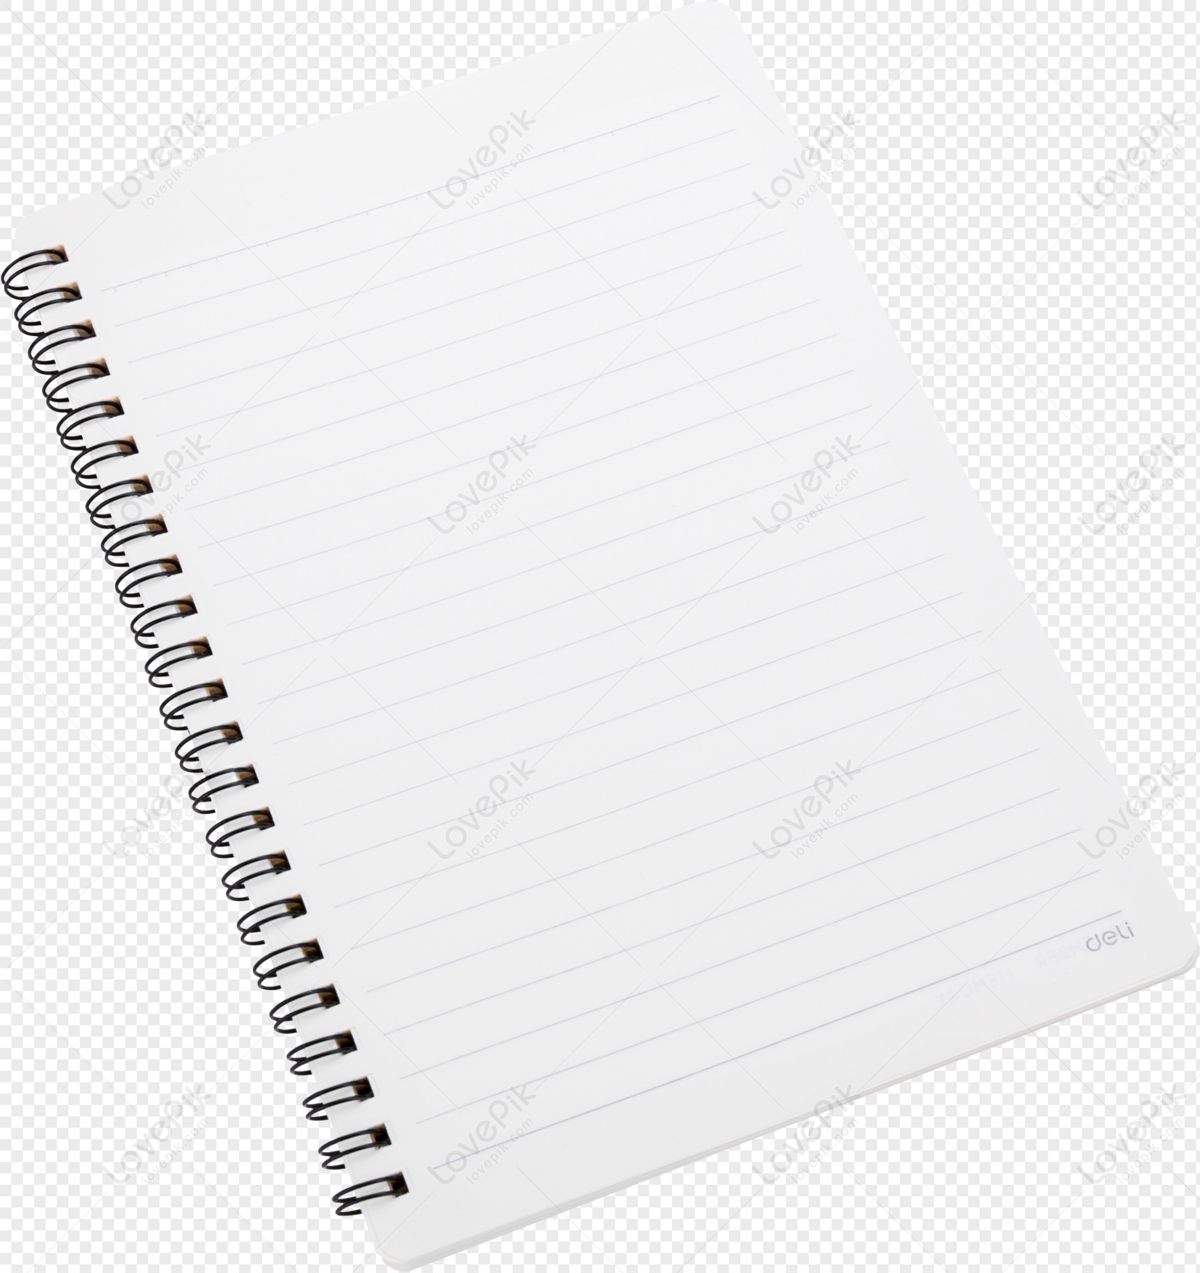 Notebook PNG White Transparent And Clipart Image For Free Download -  Lovepik | 400311072